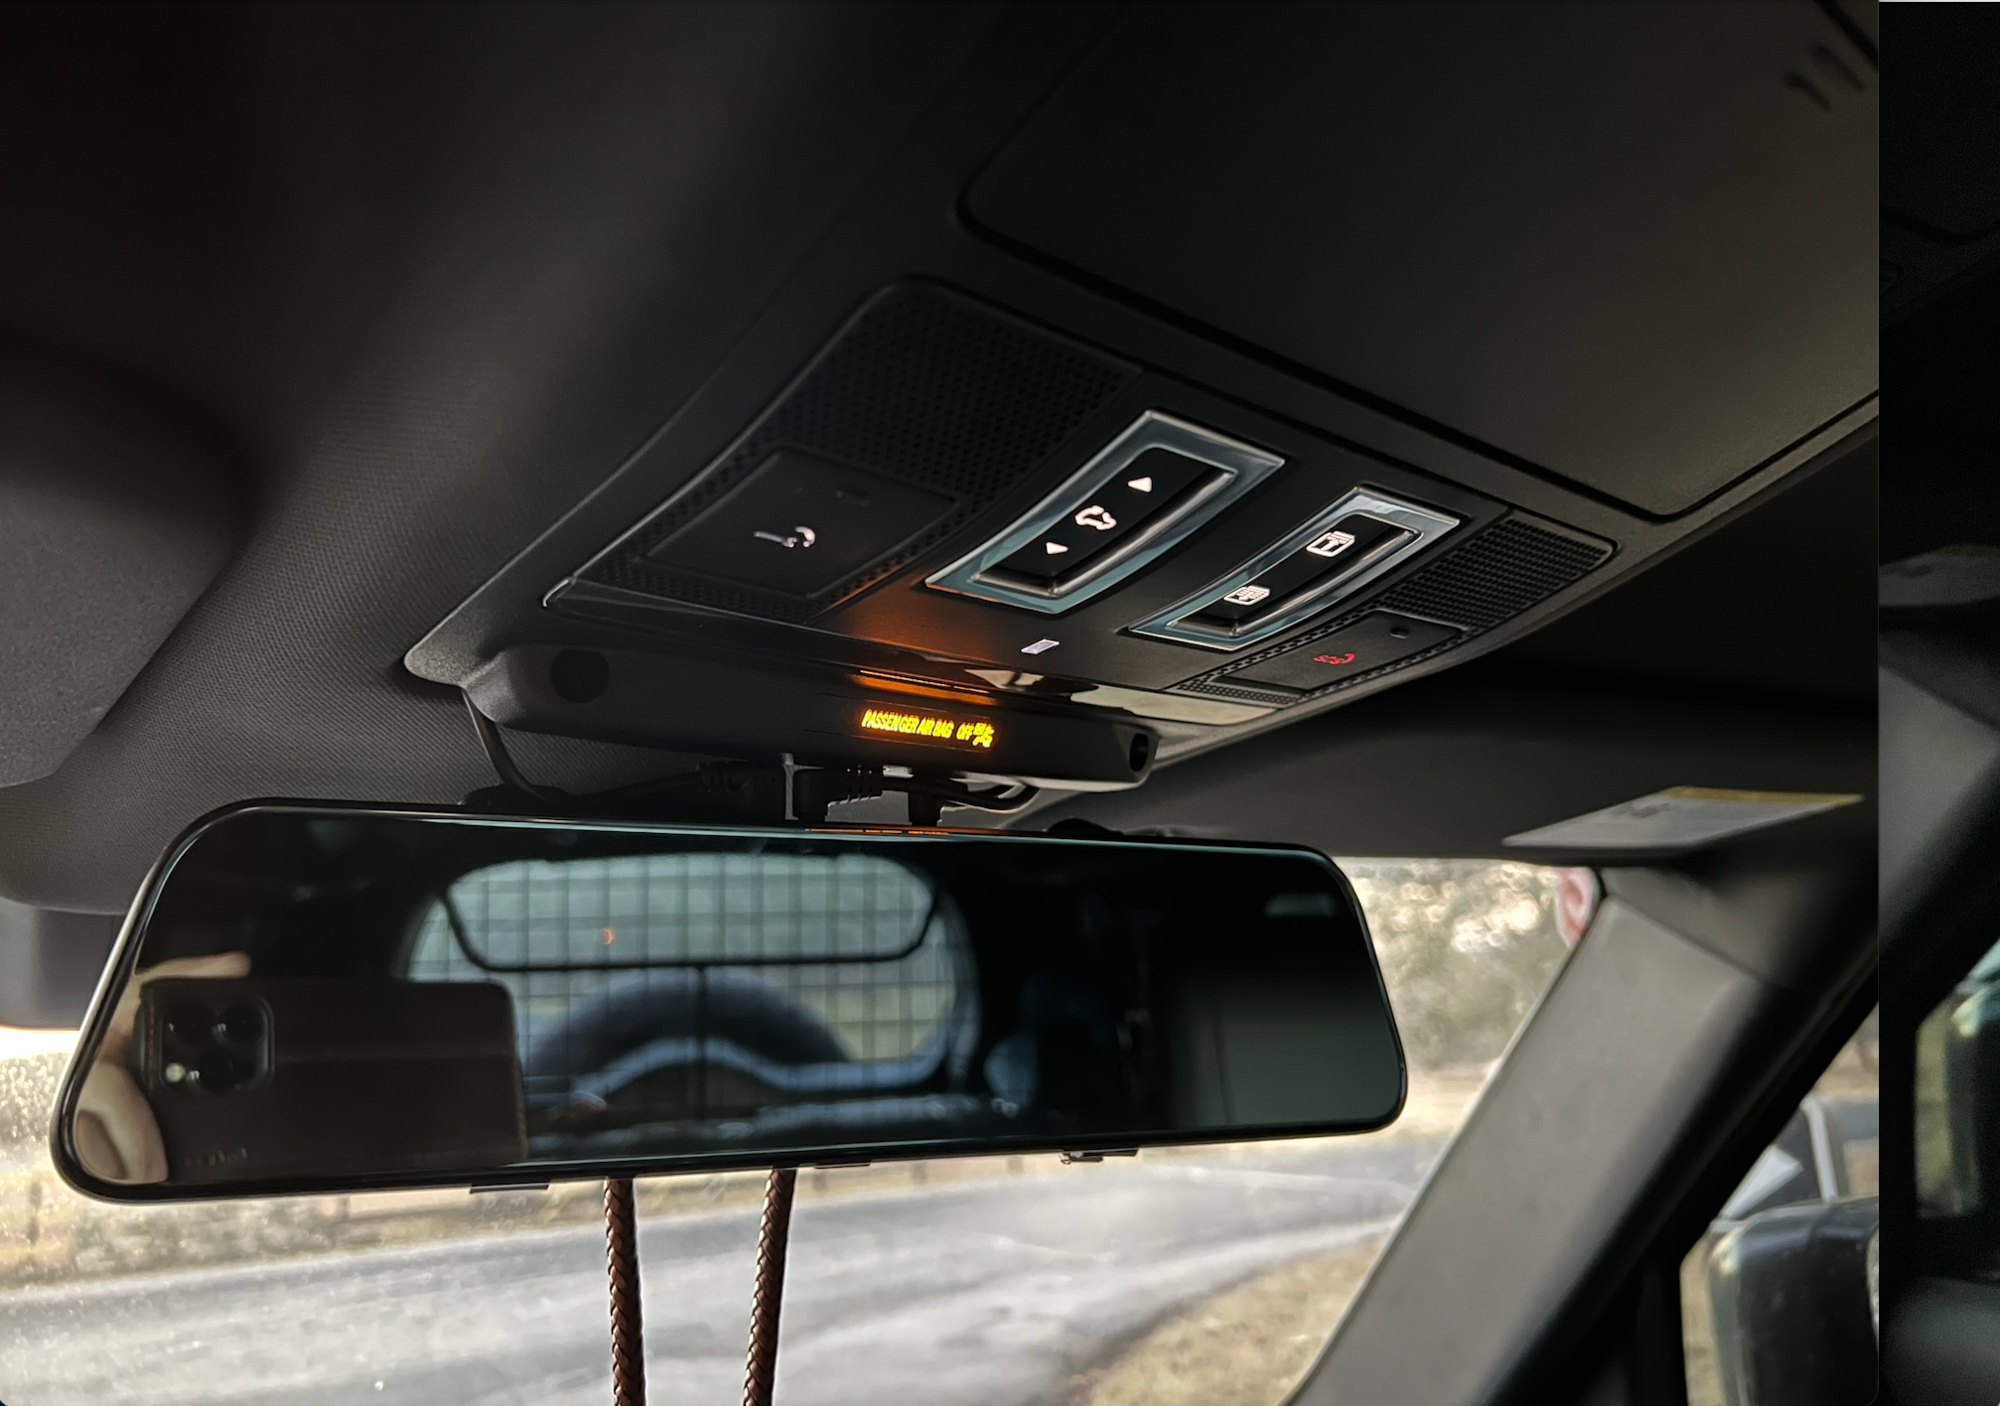 How ClearSight interior rear-view mirror on the new Land Rover